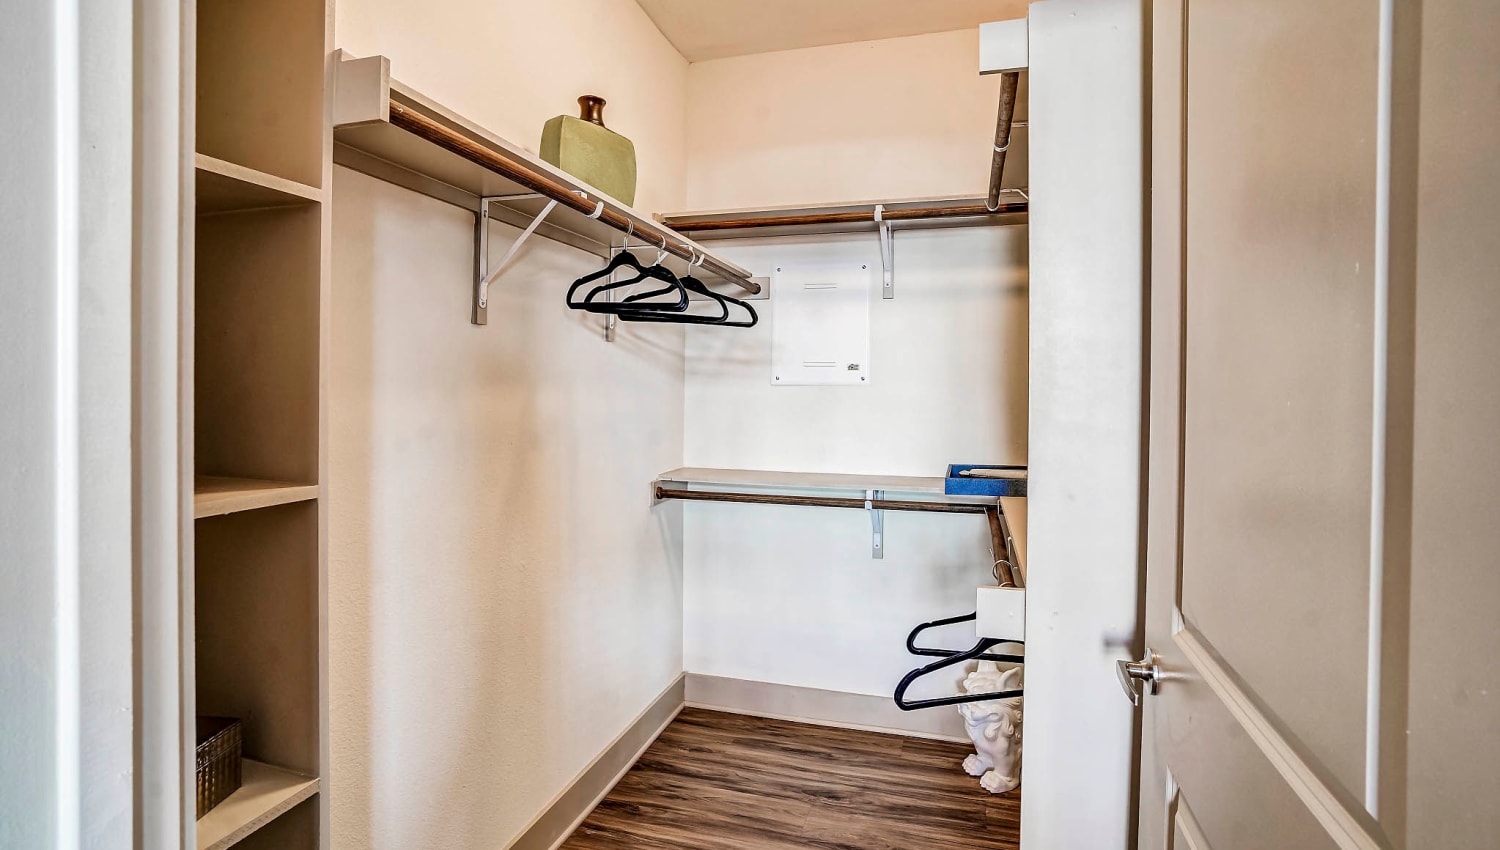 Spacious walk-in closet in a model apartment at Sundance Creek in Midland, Texas